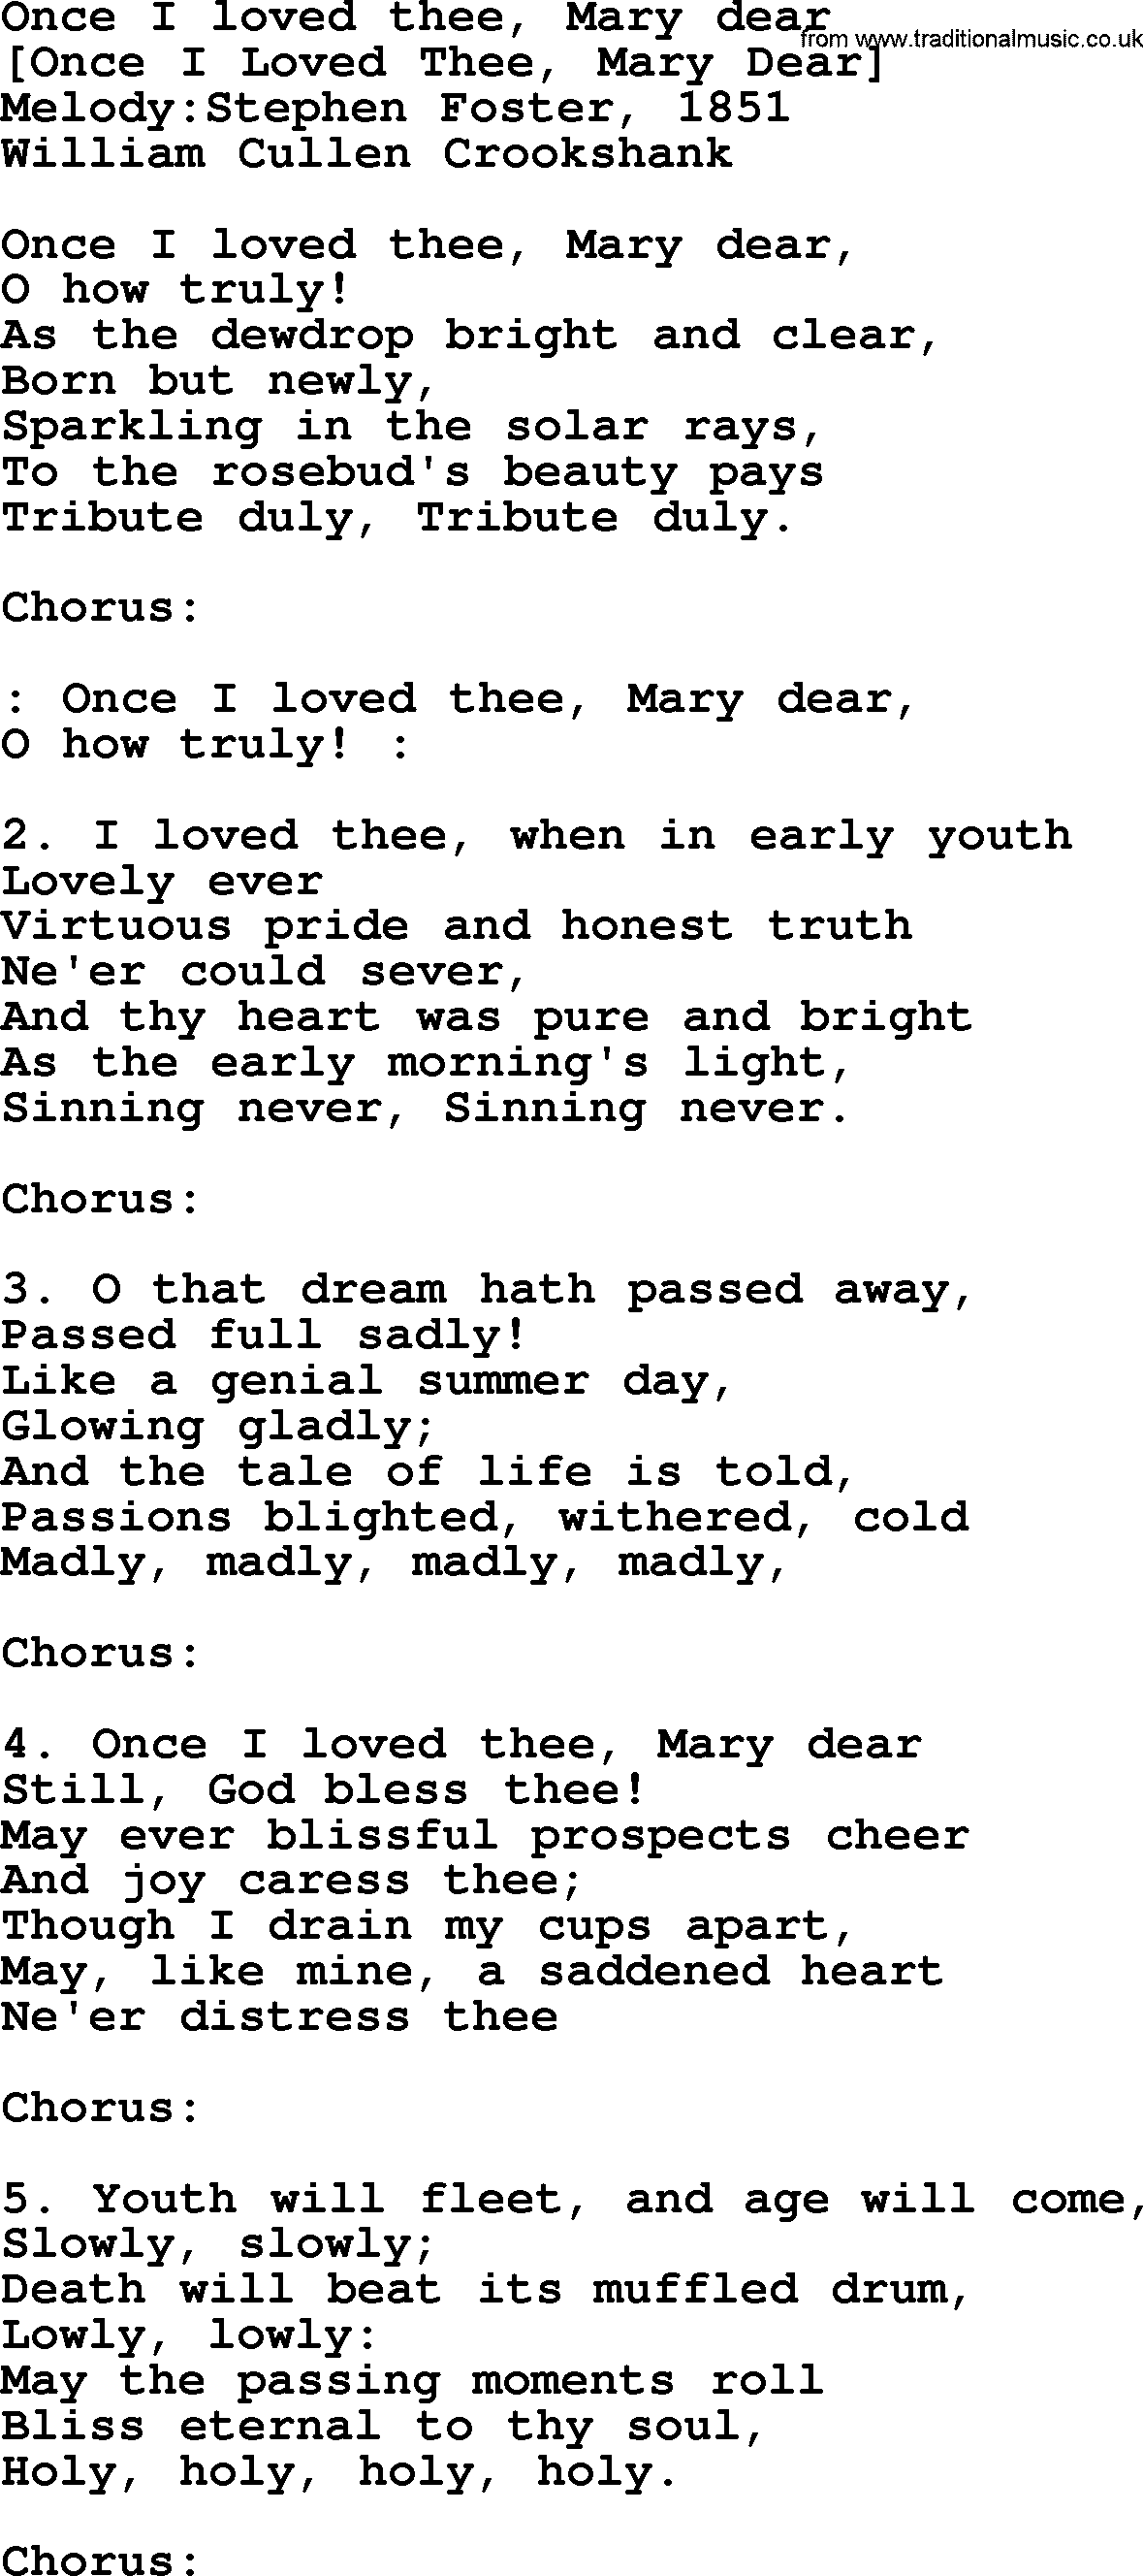 Old American Song: Once I Loved Thee, Mary Dear, lyrics